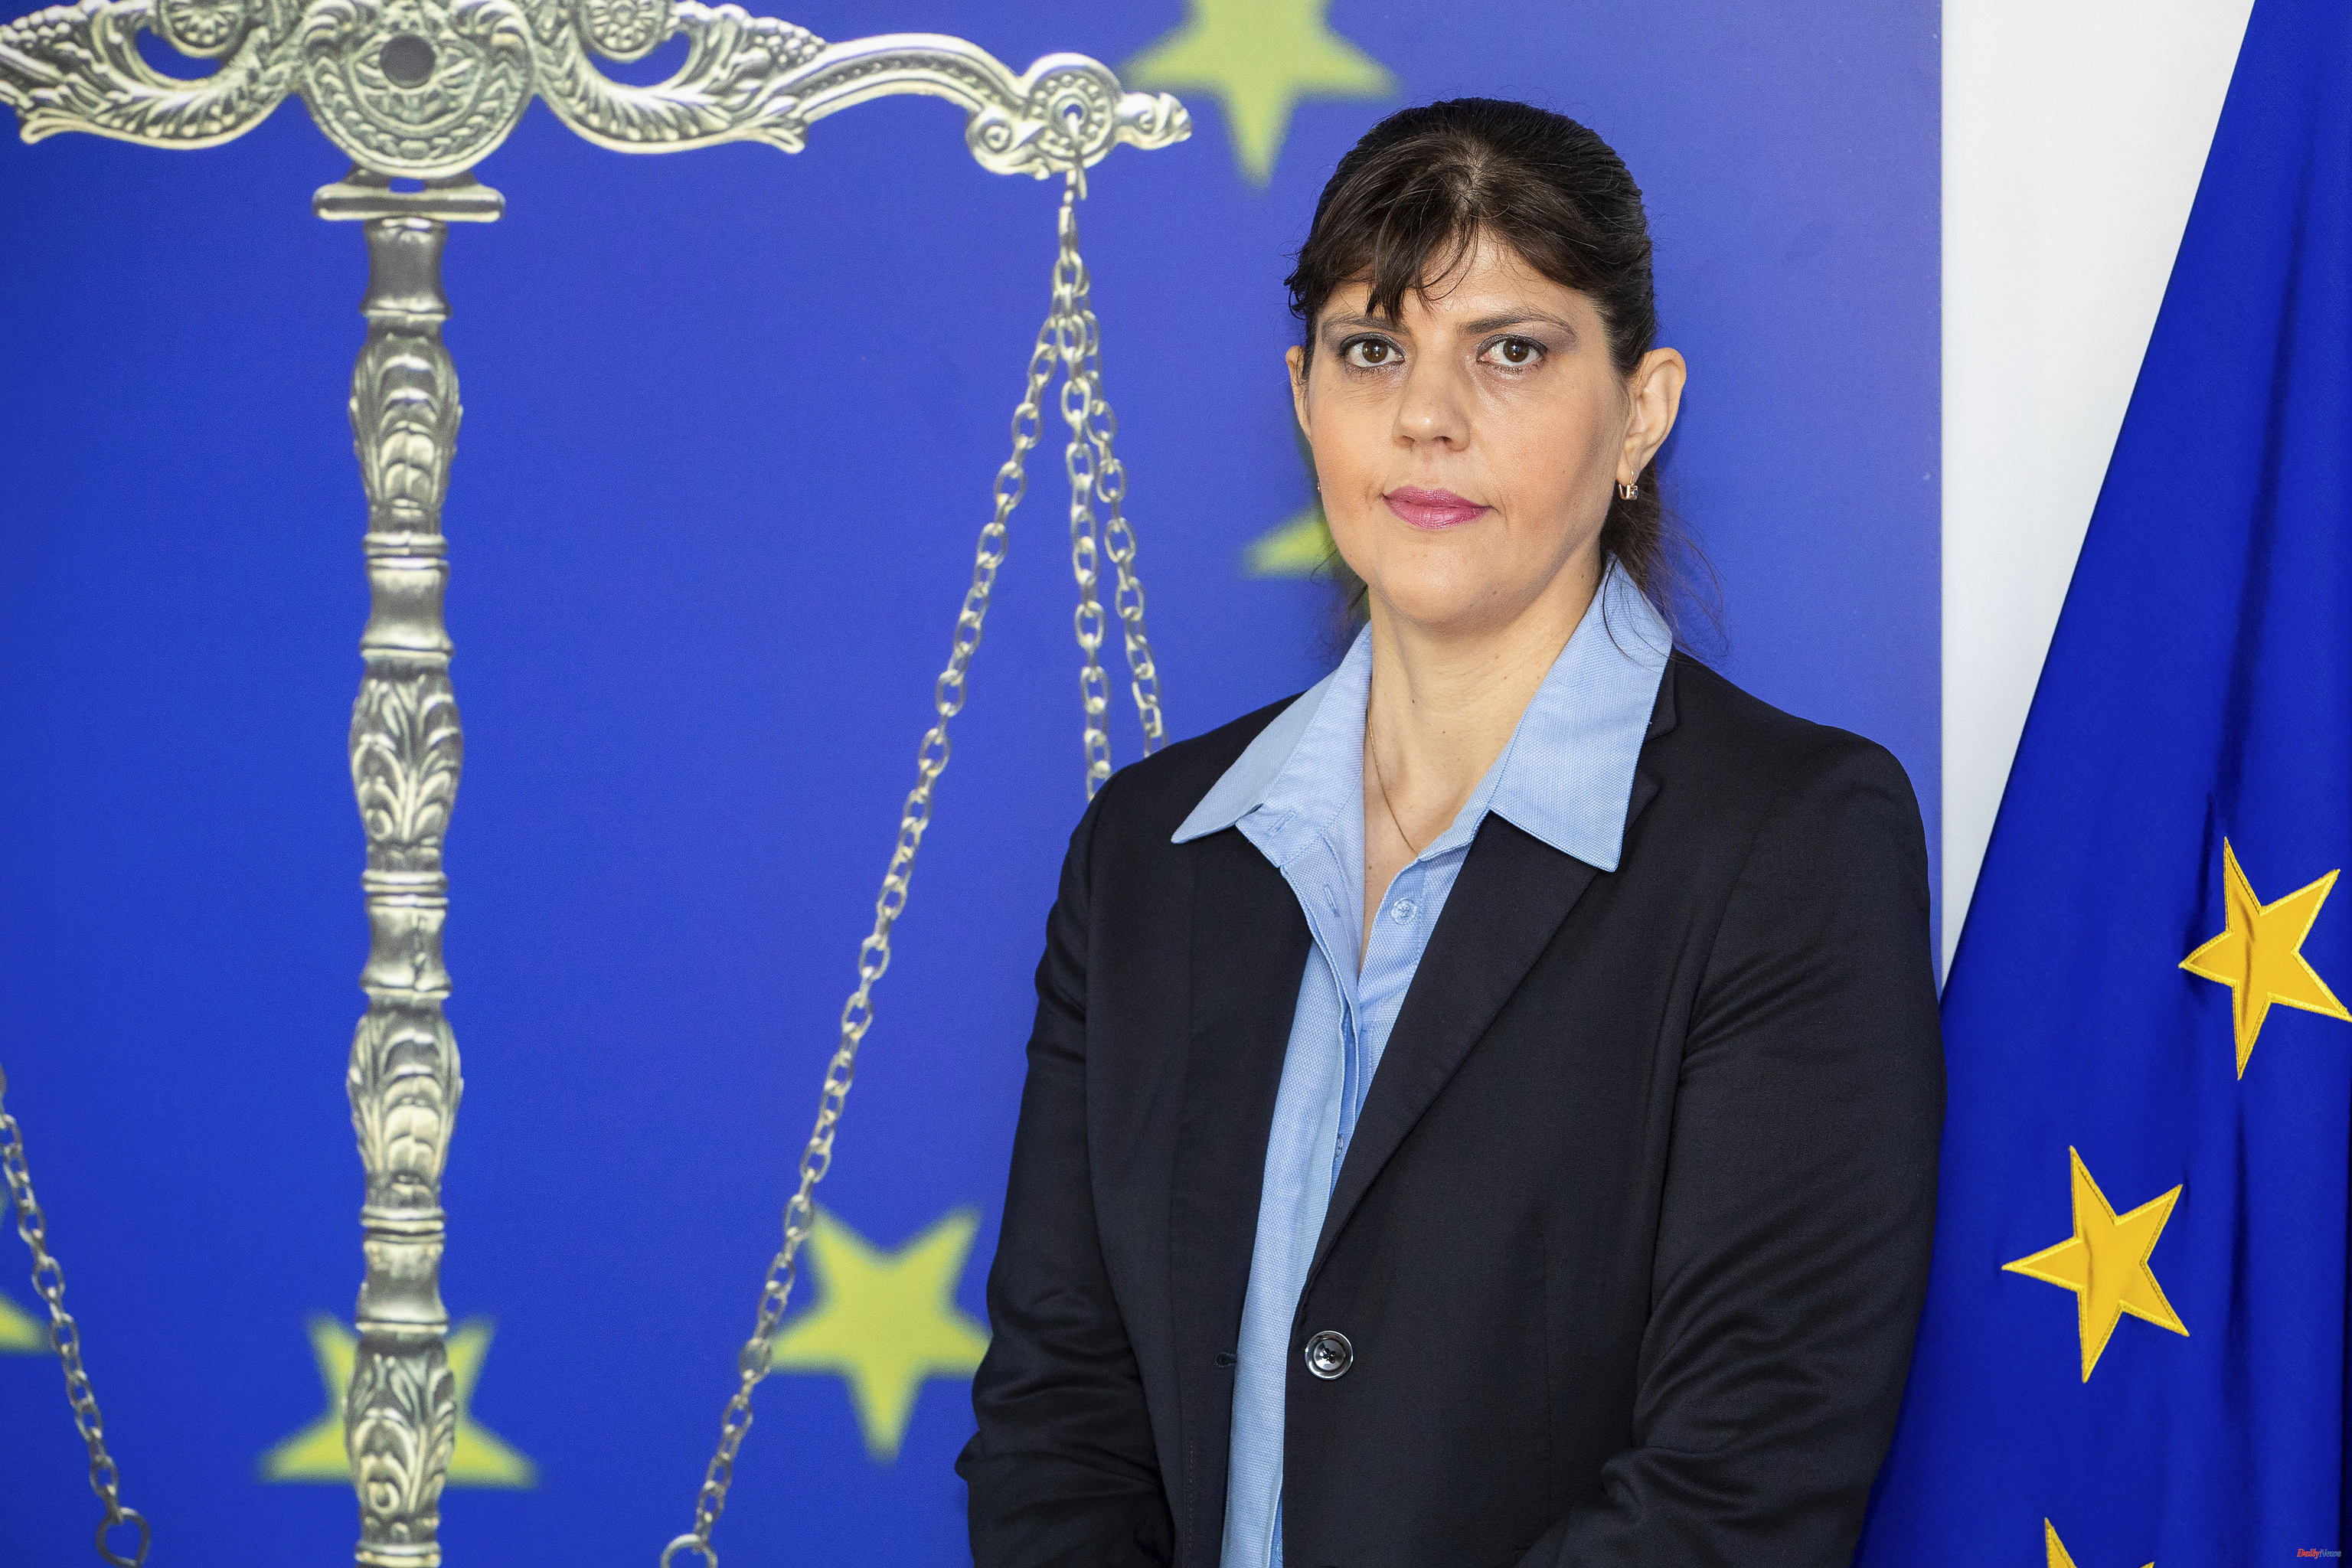 European Funds The European prosecutor criticizes the lack of cooperation from the Government: "Most of the countries have responded. Spain has not"